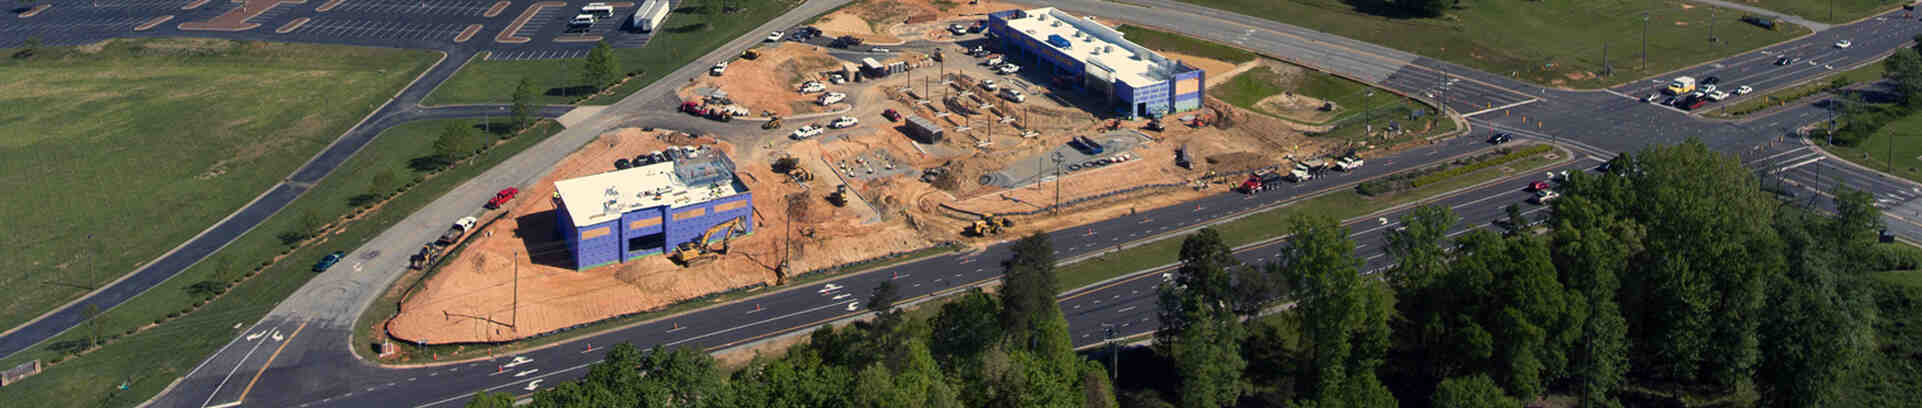 Parc Companies Acquisitions for Commercial and Residential Development in NC